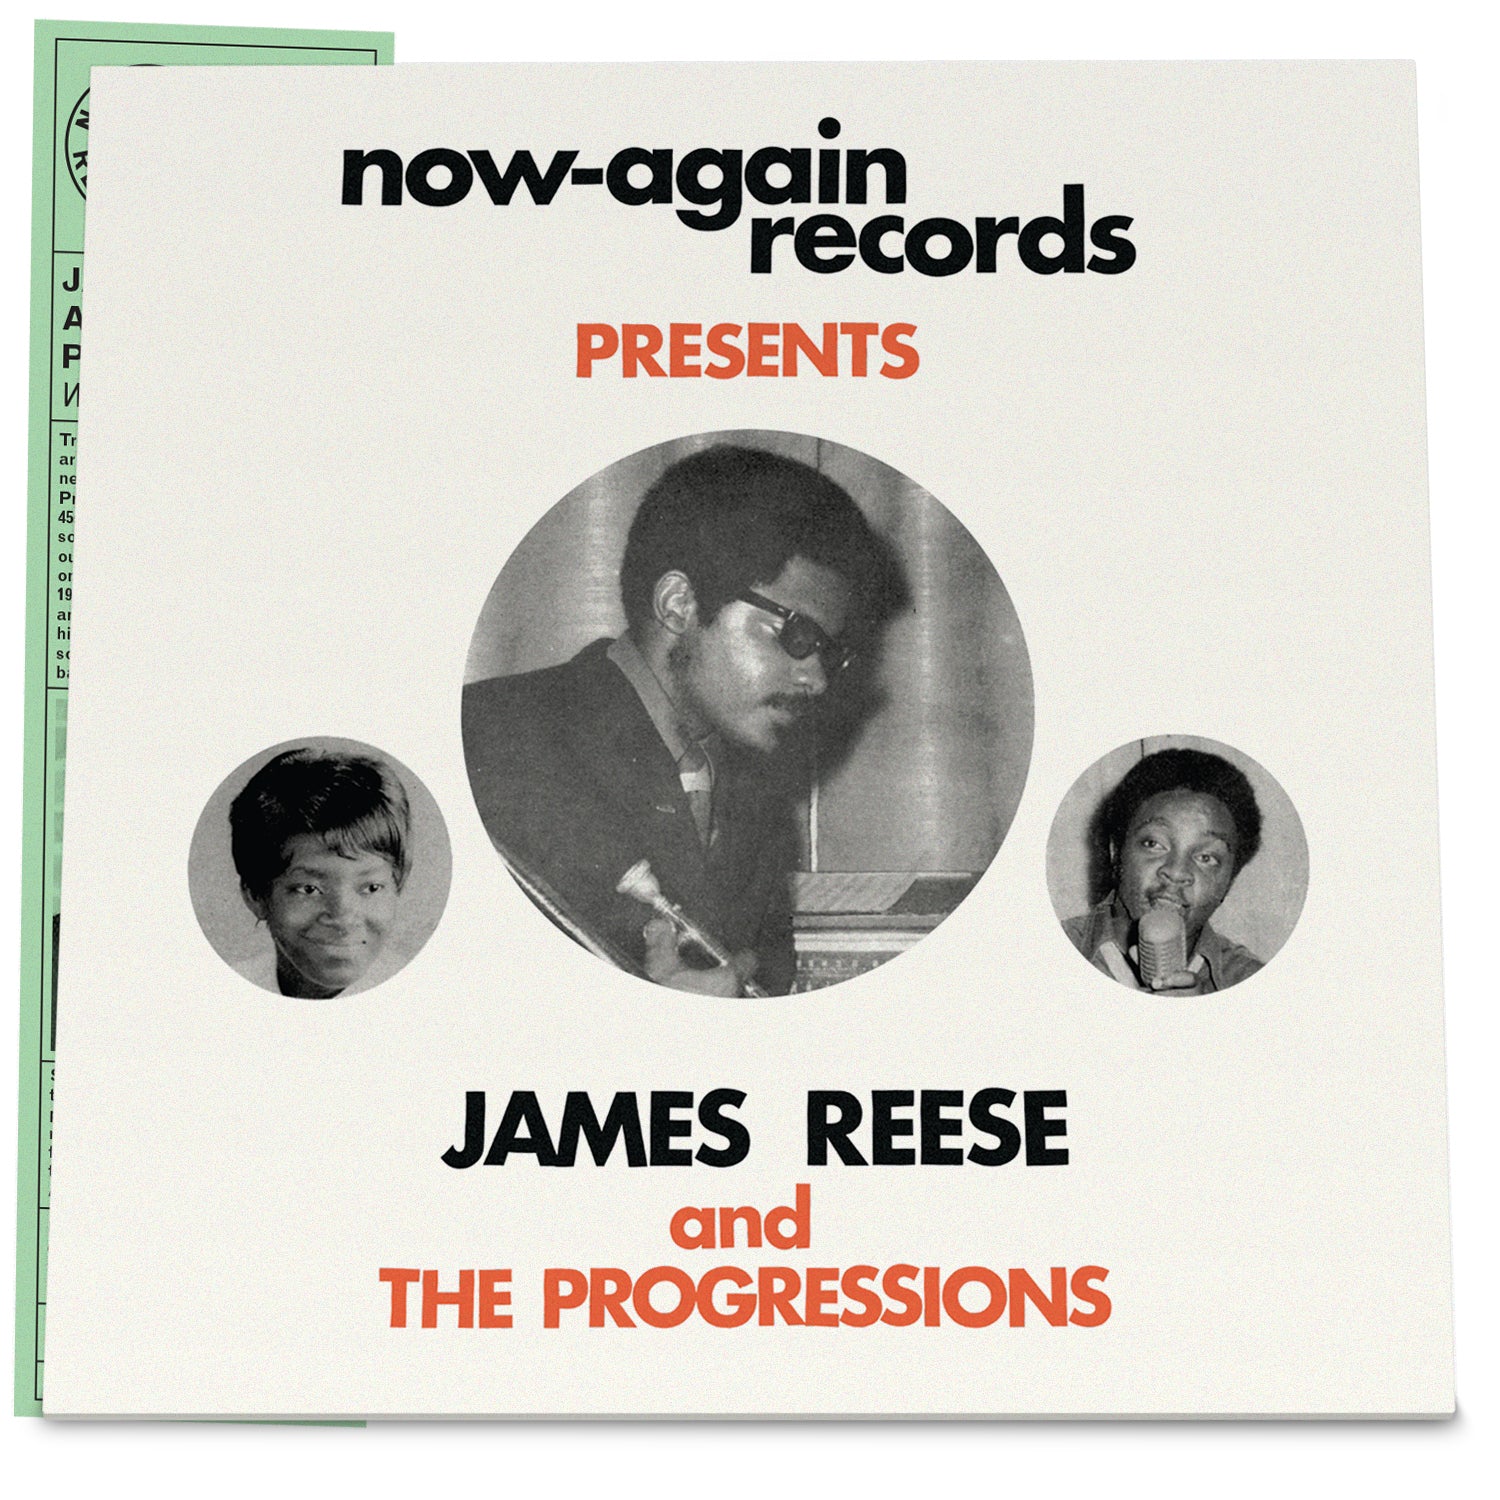 James Reese and the Progressions - Wait For Me (The Complete Works 1967-1972)